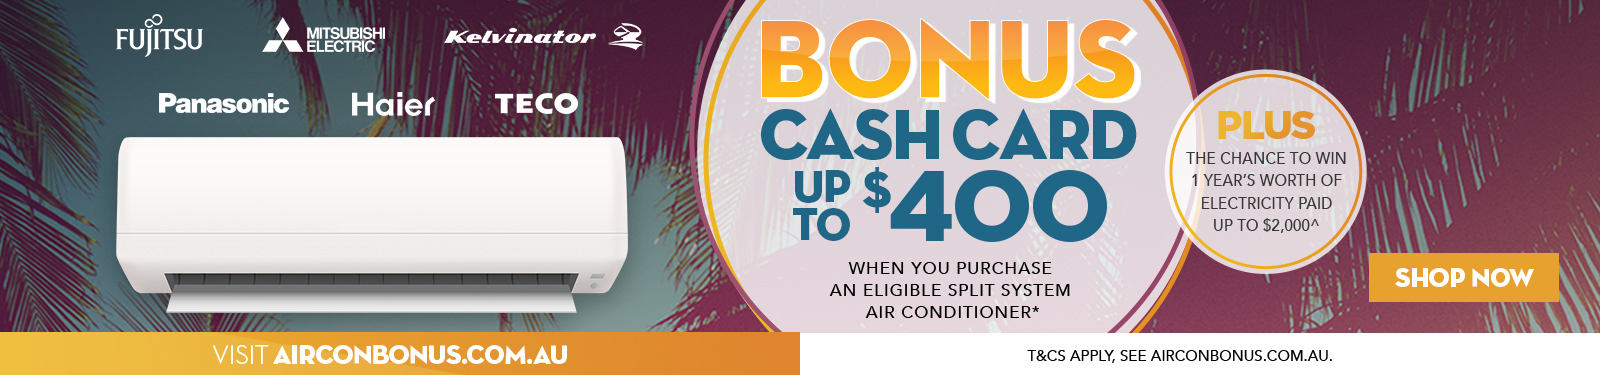 Bonus Prepaid Mastercard Valued At Up To $400 When You Purchase a Selected Split System Air Conditioner